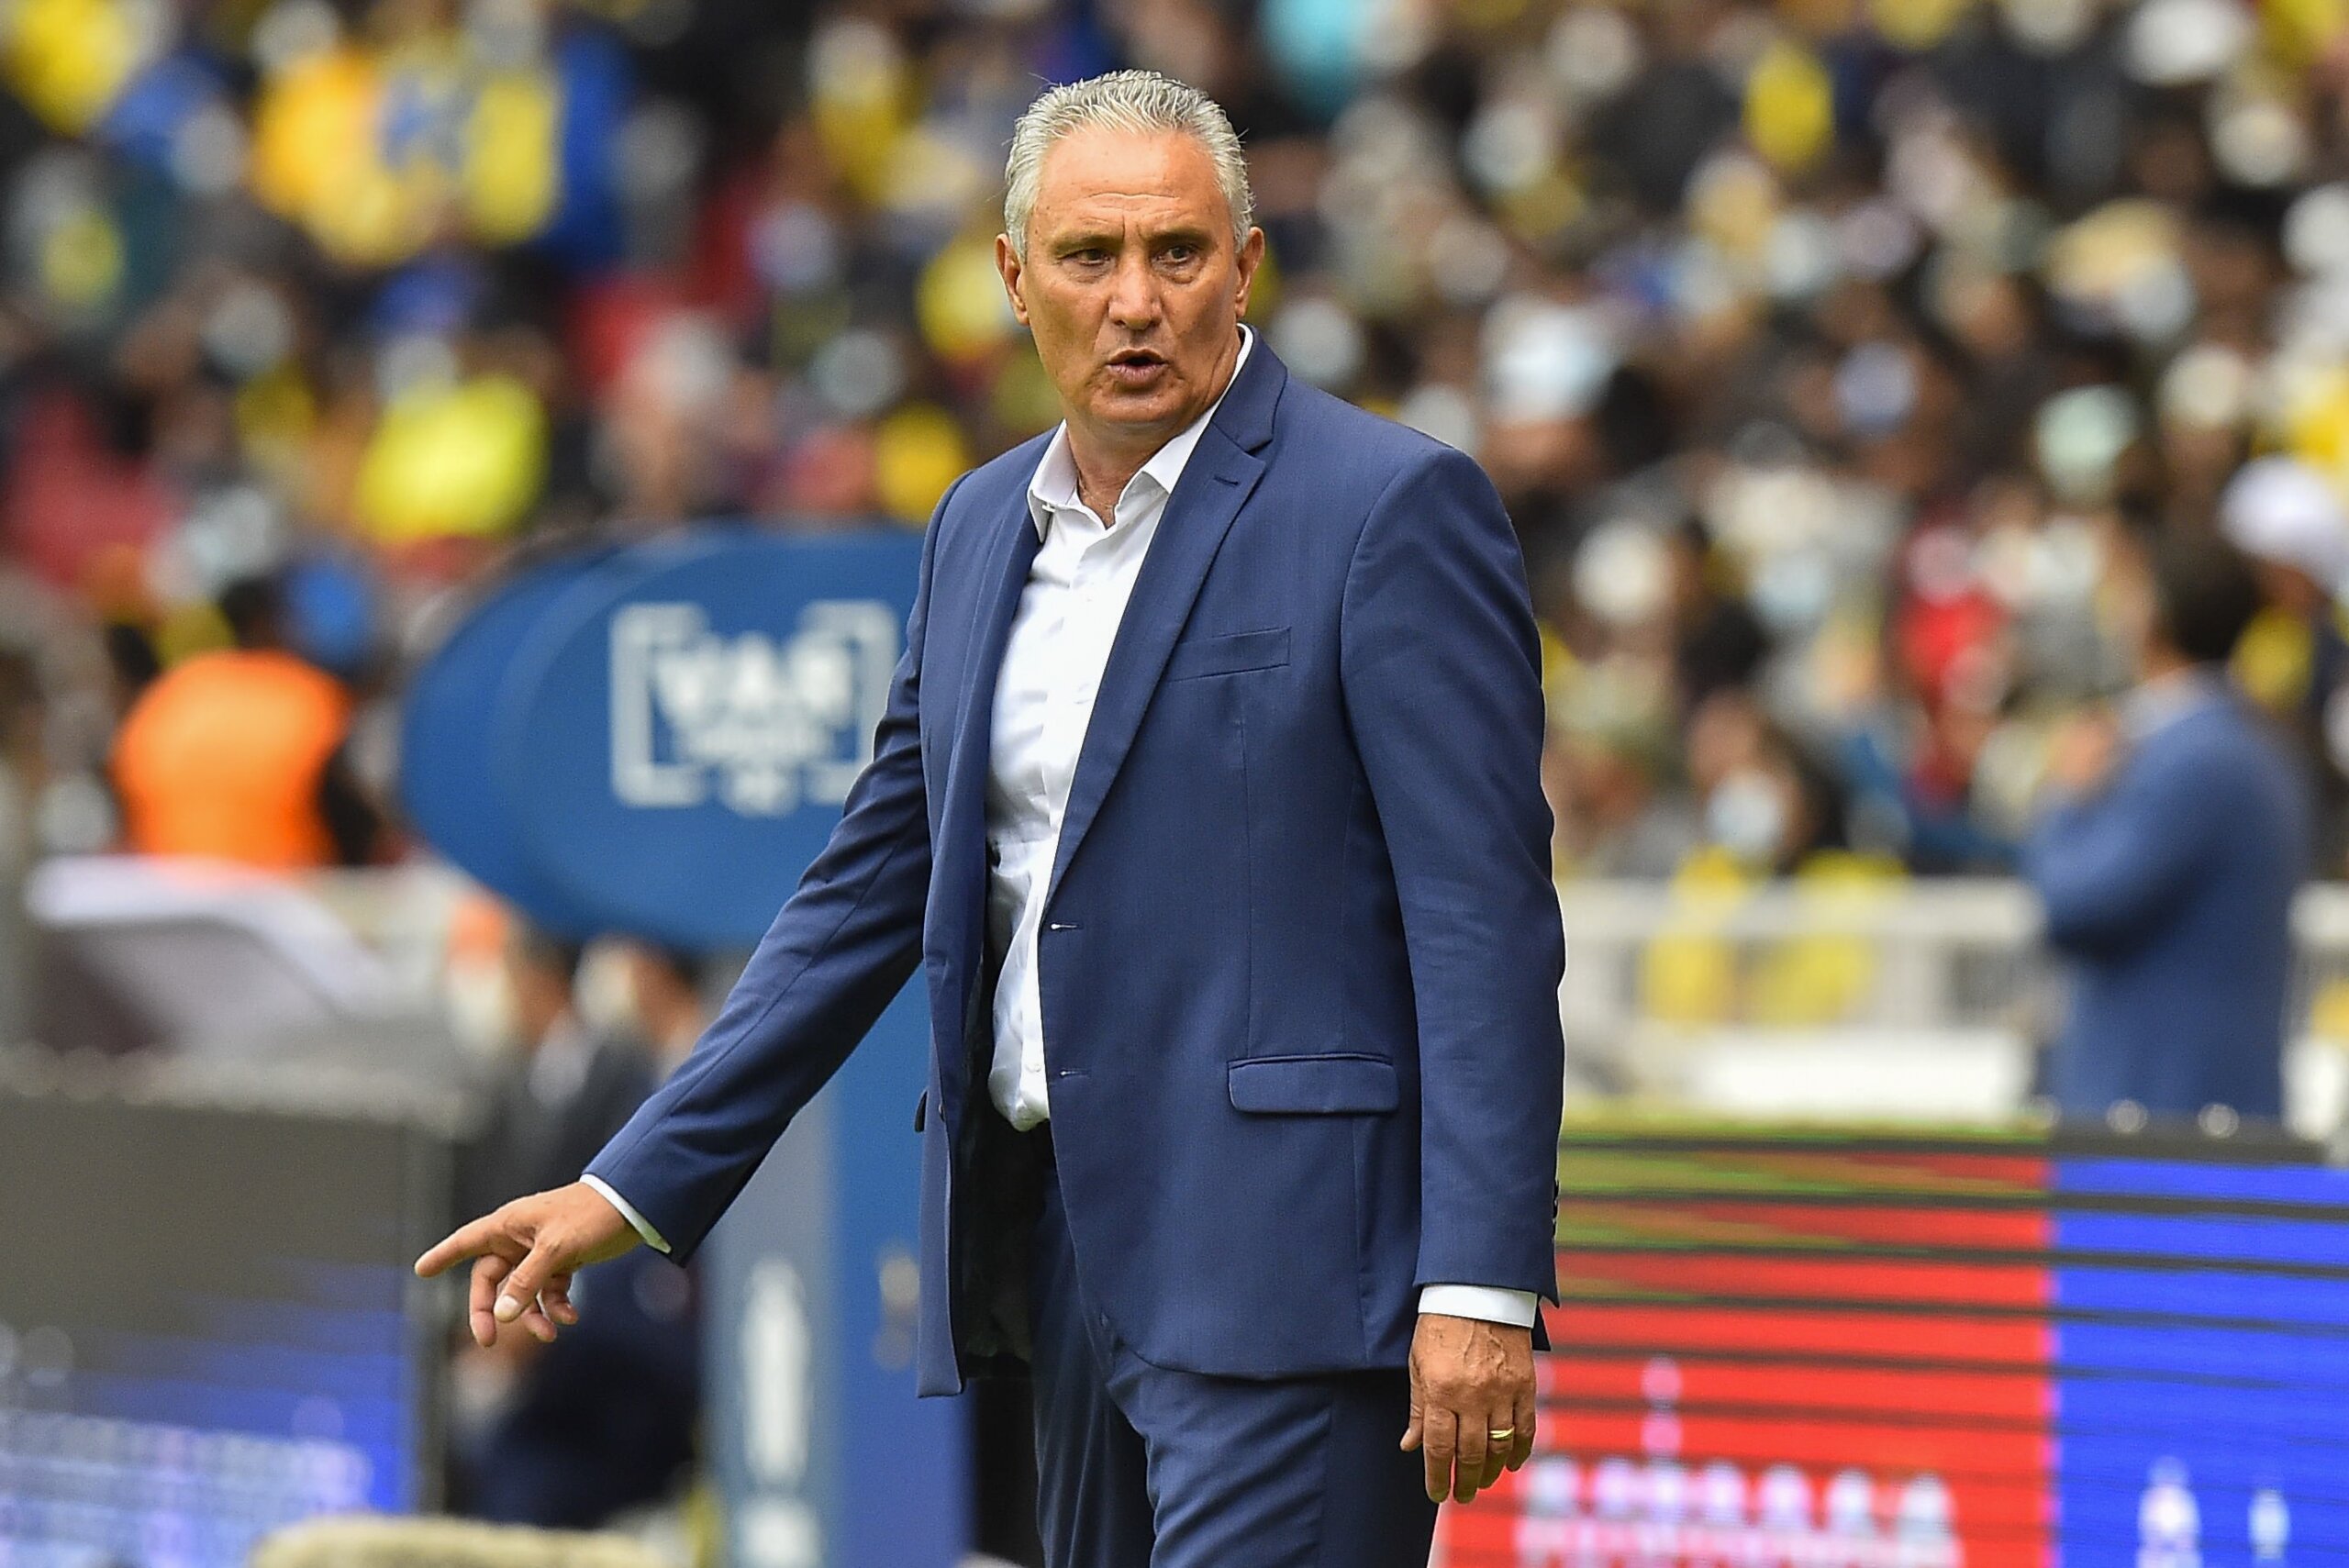 Brazil coach Tite to step down after World Cup in Qatar WTOP News